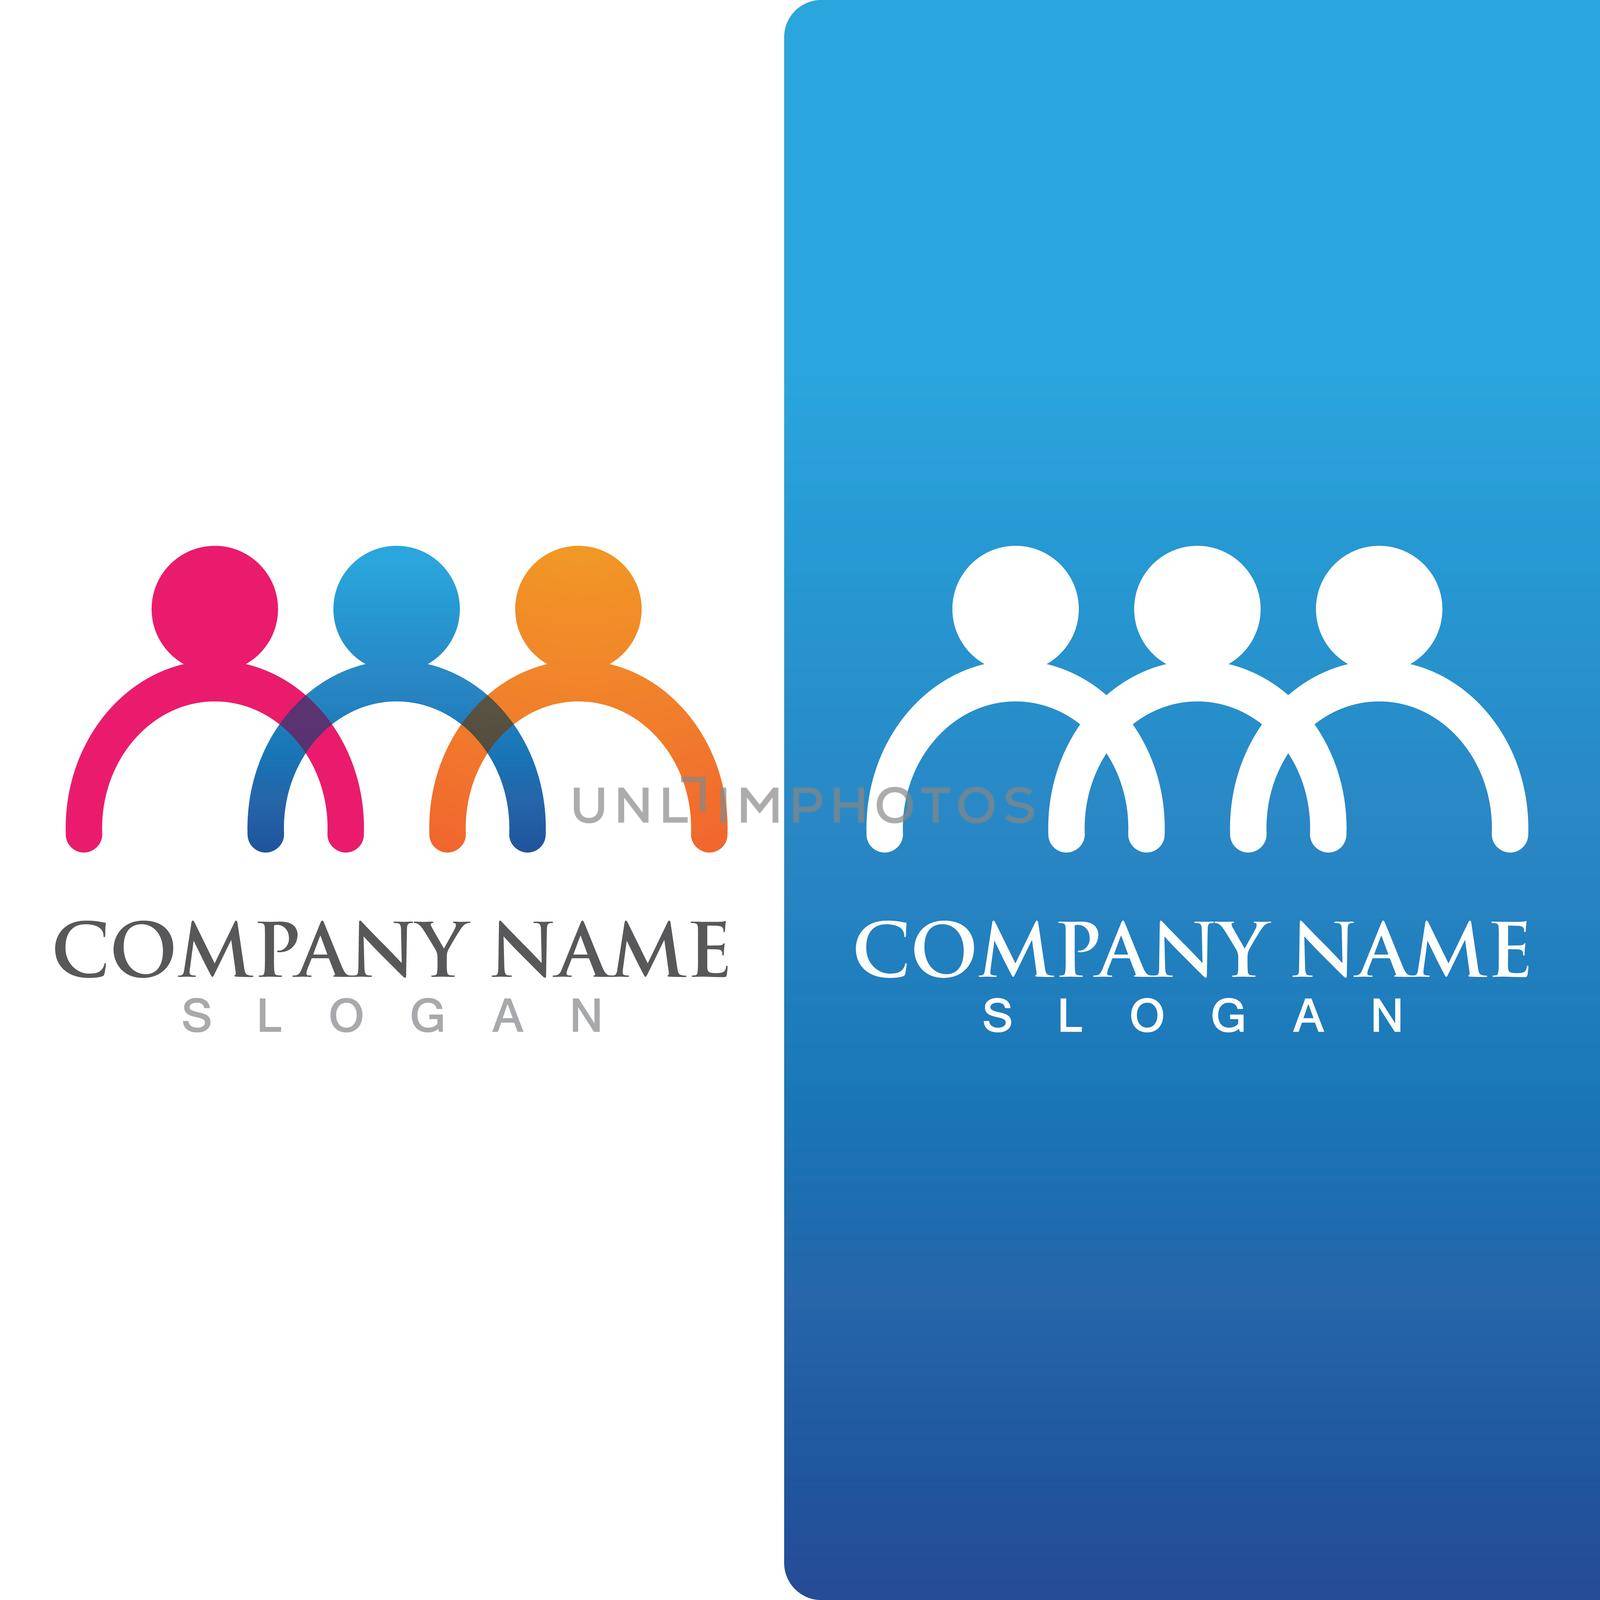 Community group logo, network and social icon by Mrsongrphc